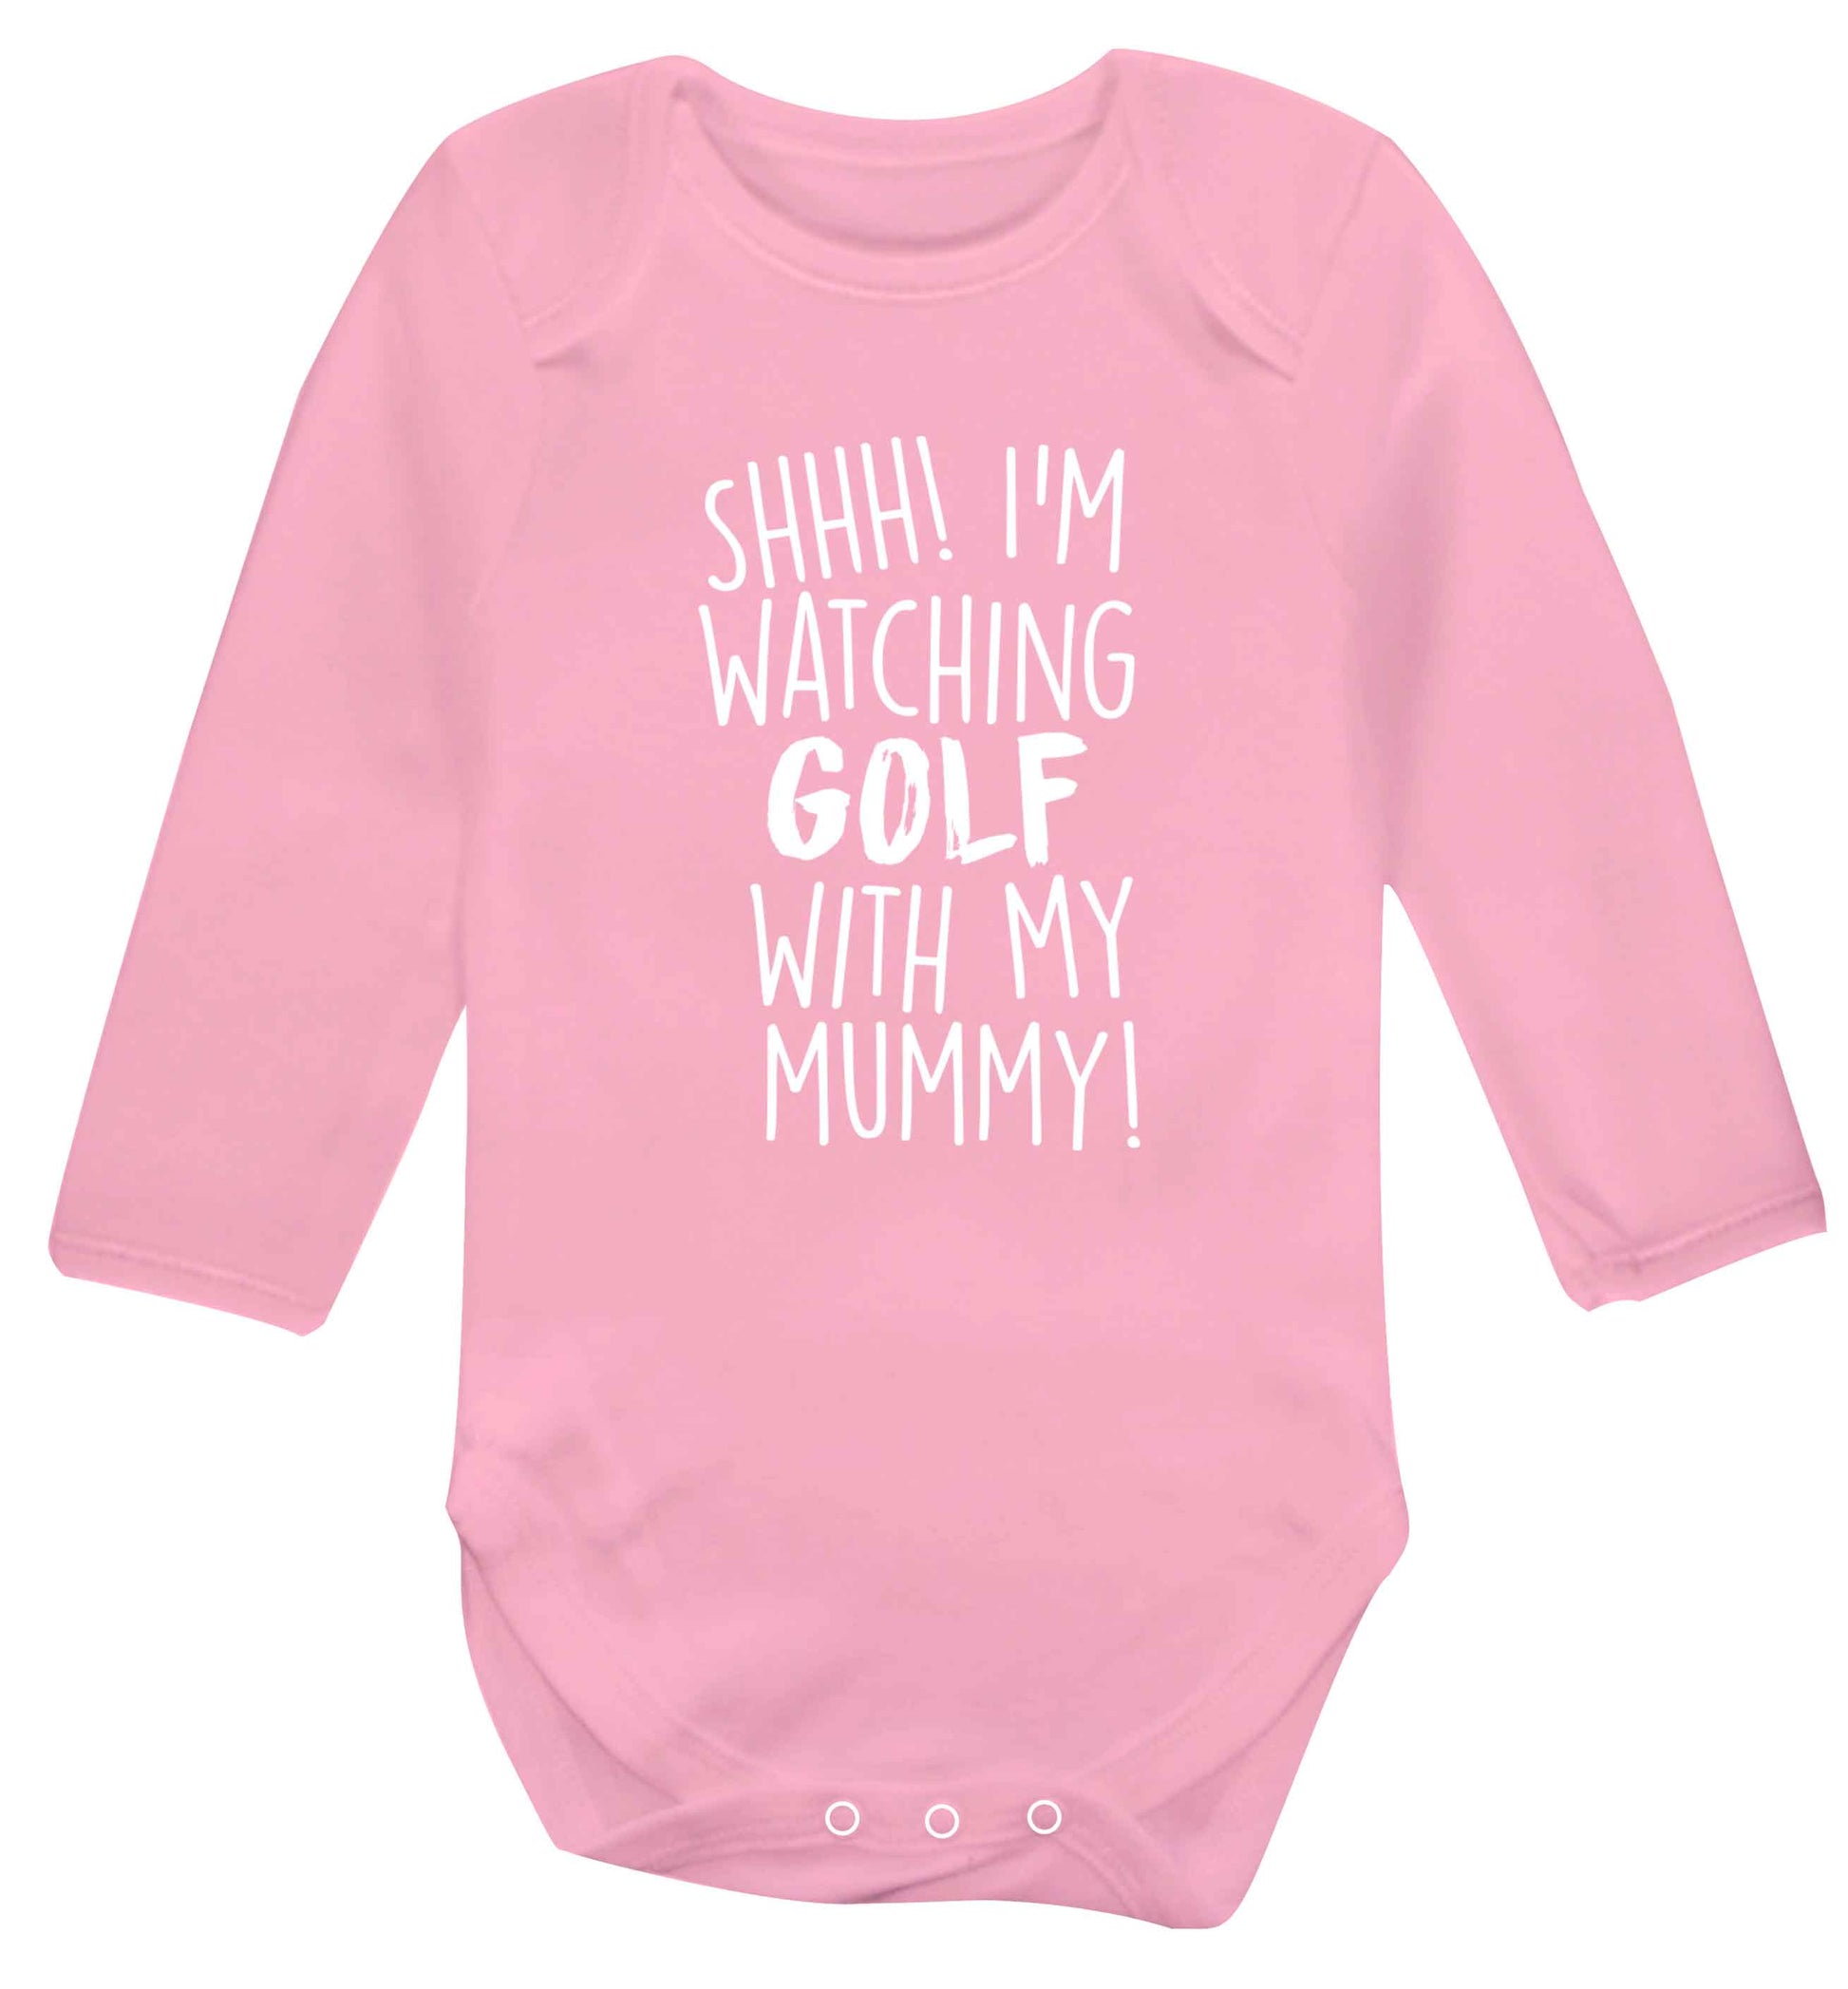 Shh I'm watching golf with my mummy Baby Vest long sleeved pale pink 6-12 months